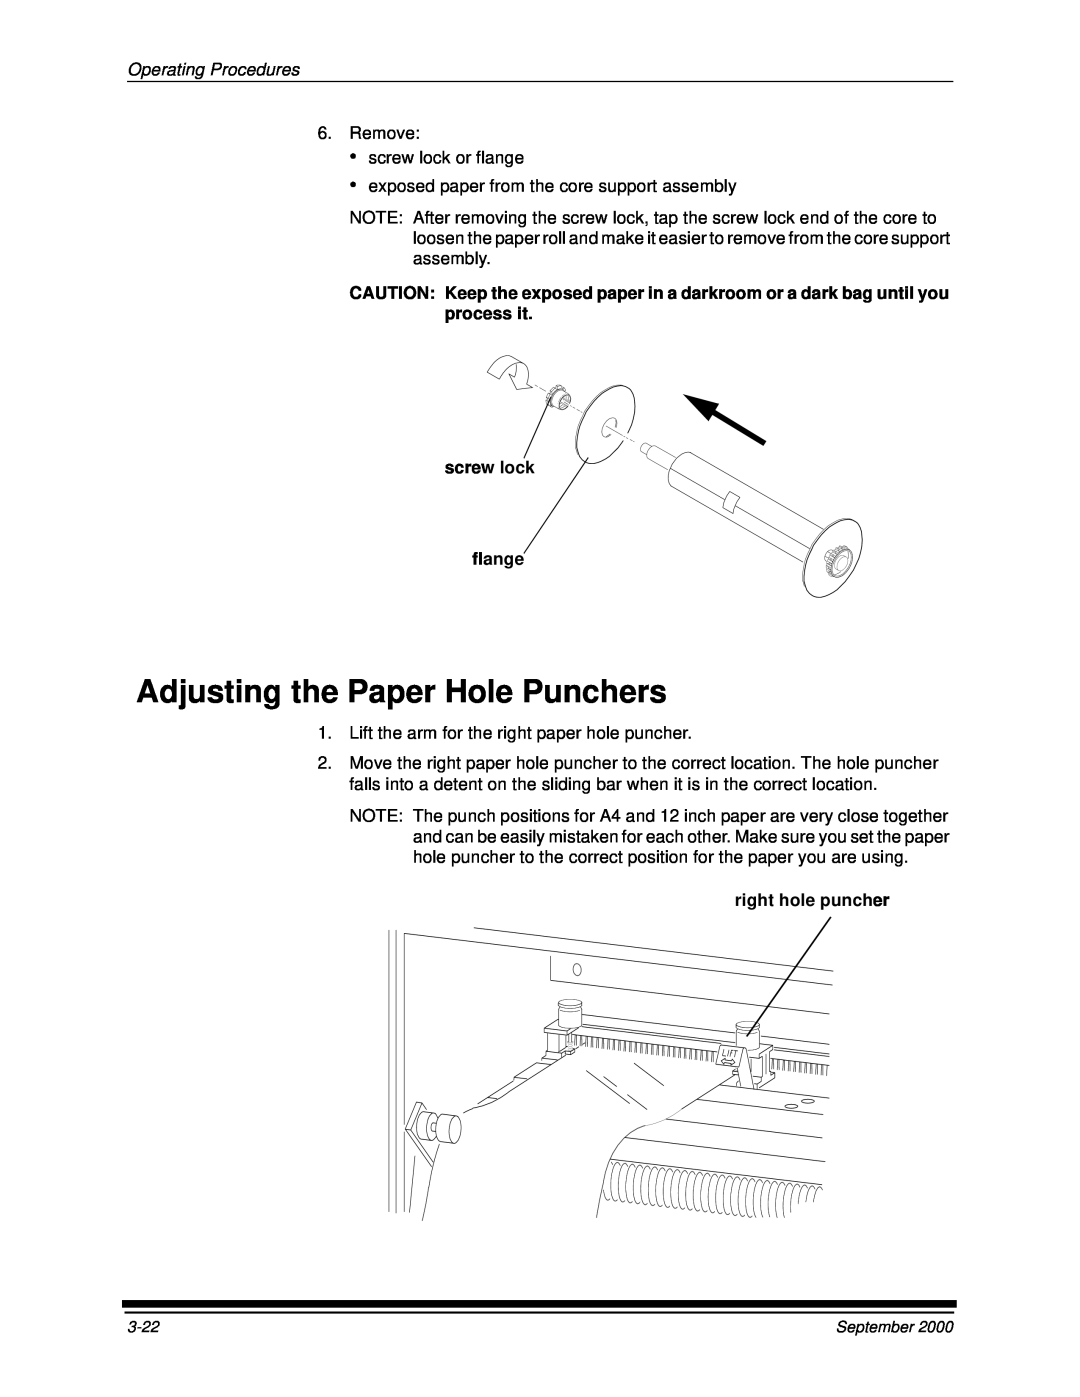 Kodak 20R manual Adjusting the Paper Hole Punchers, Operating Procedures, screw lock flange, right hole puncher 